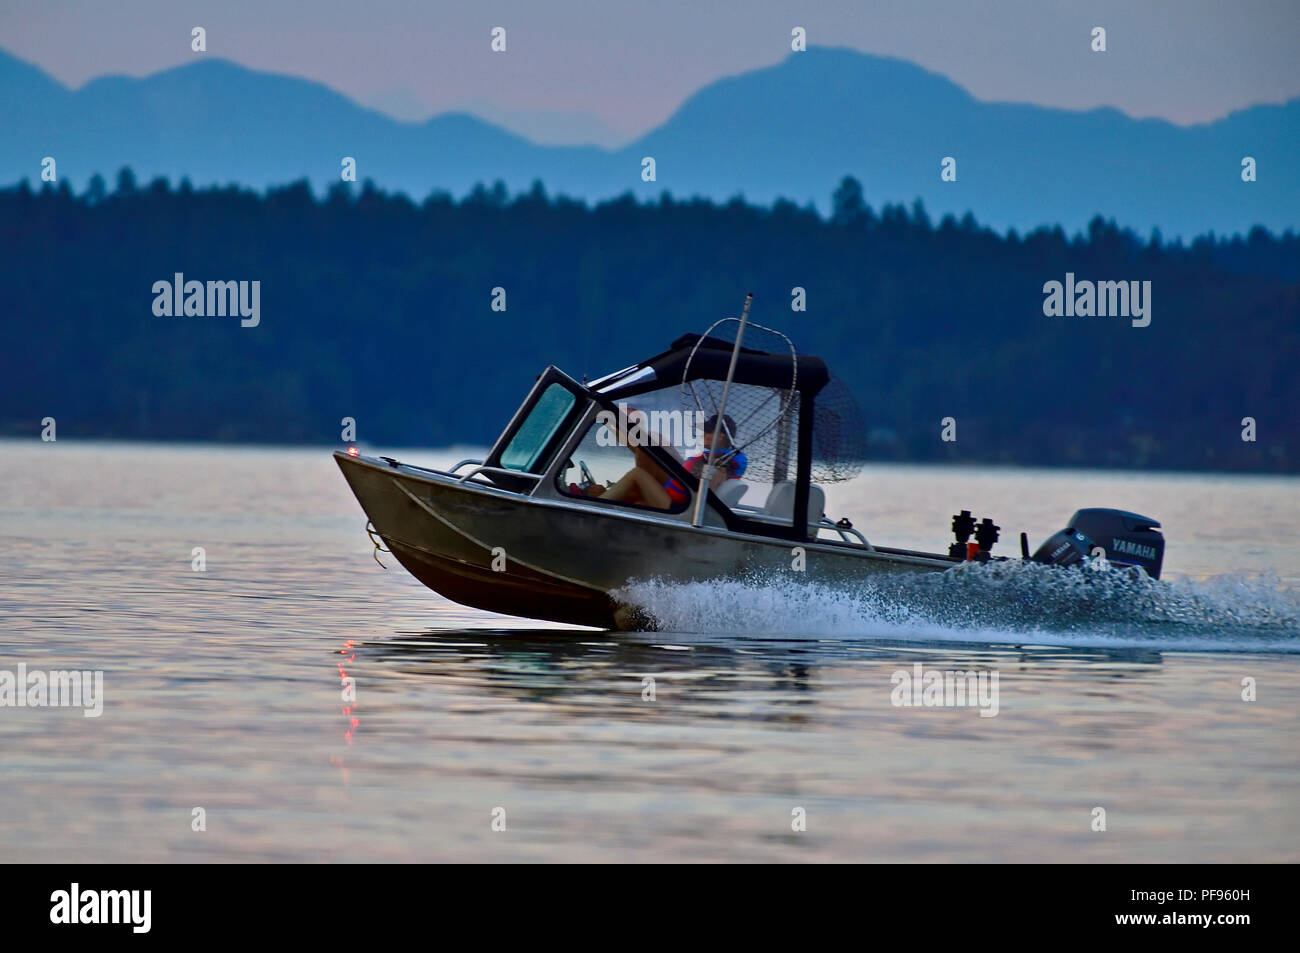 A horizontal image of a fast moving motor boat traveling along the water in evening light on the Strait of Georgia near Vancouver Island British Colum Stock Photo